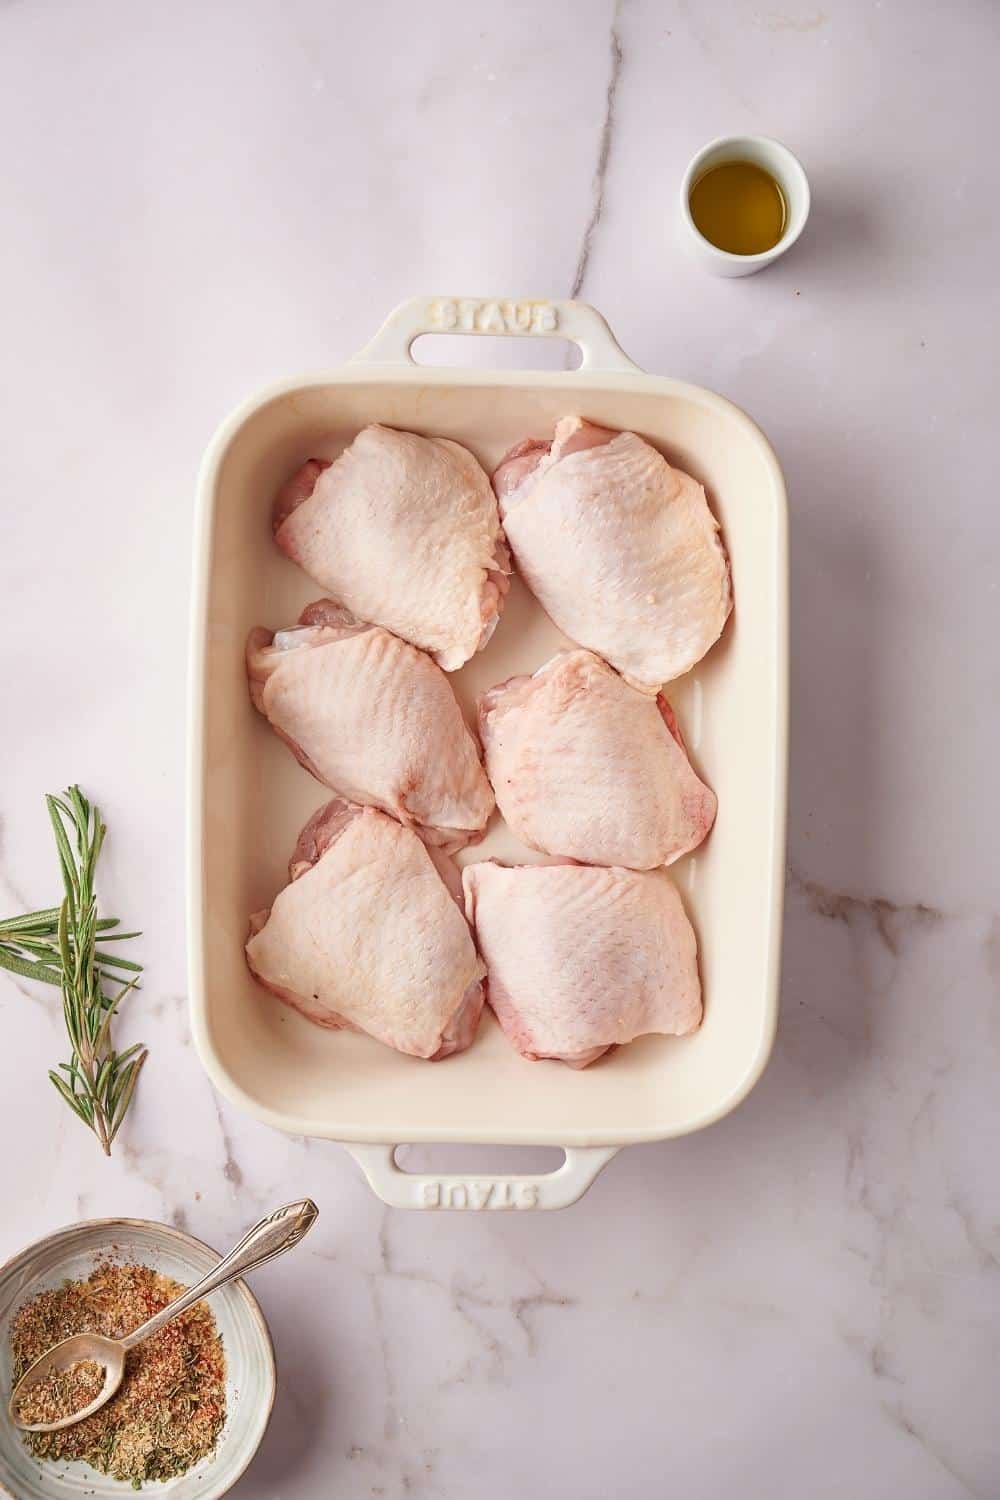 a baking tray with 6 raw chicken thighs in one layer. To the side of the tray is a small bowl of olive oil, a bowl of seasoning mix with a spoon laying on top, and a couple sprigs of fresh rosemary